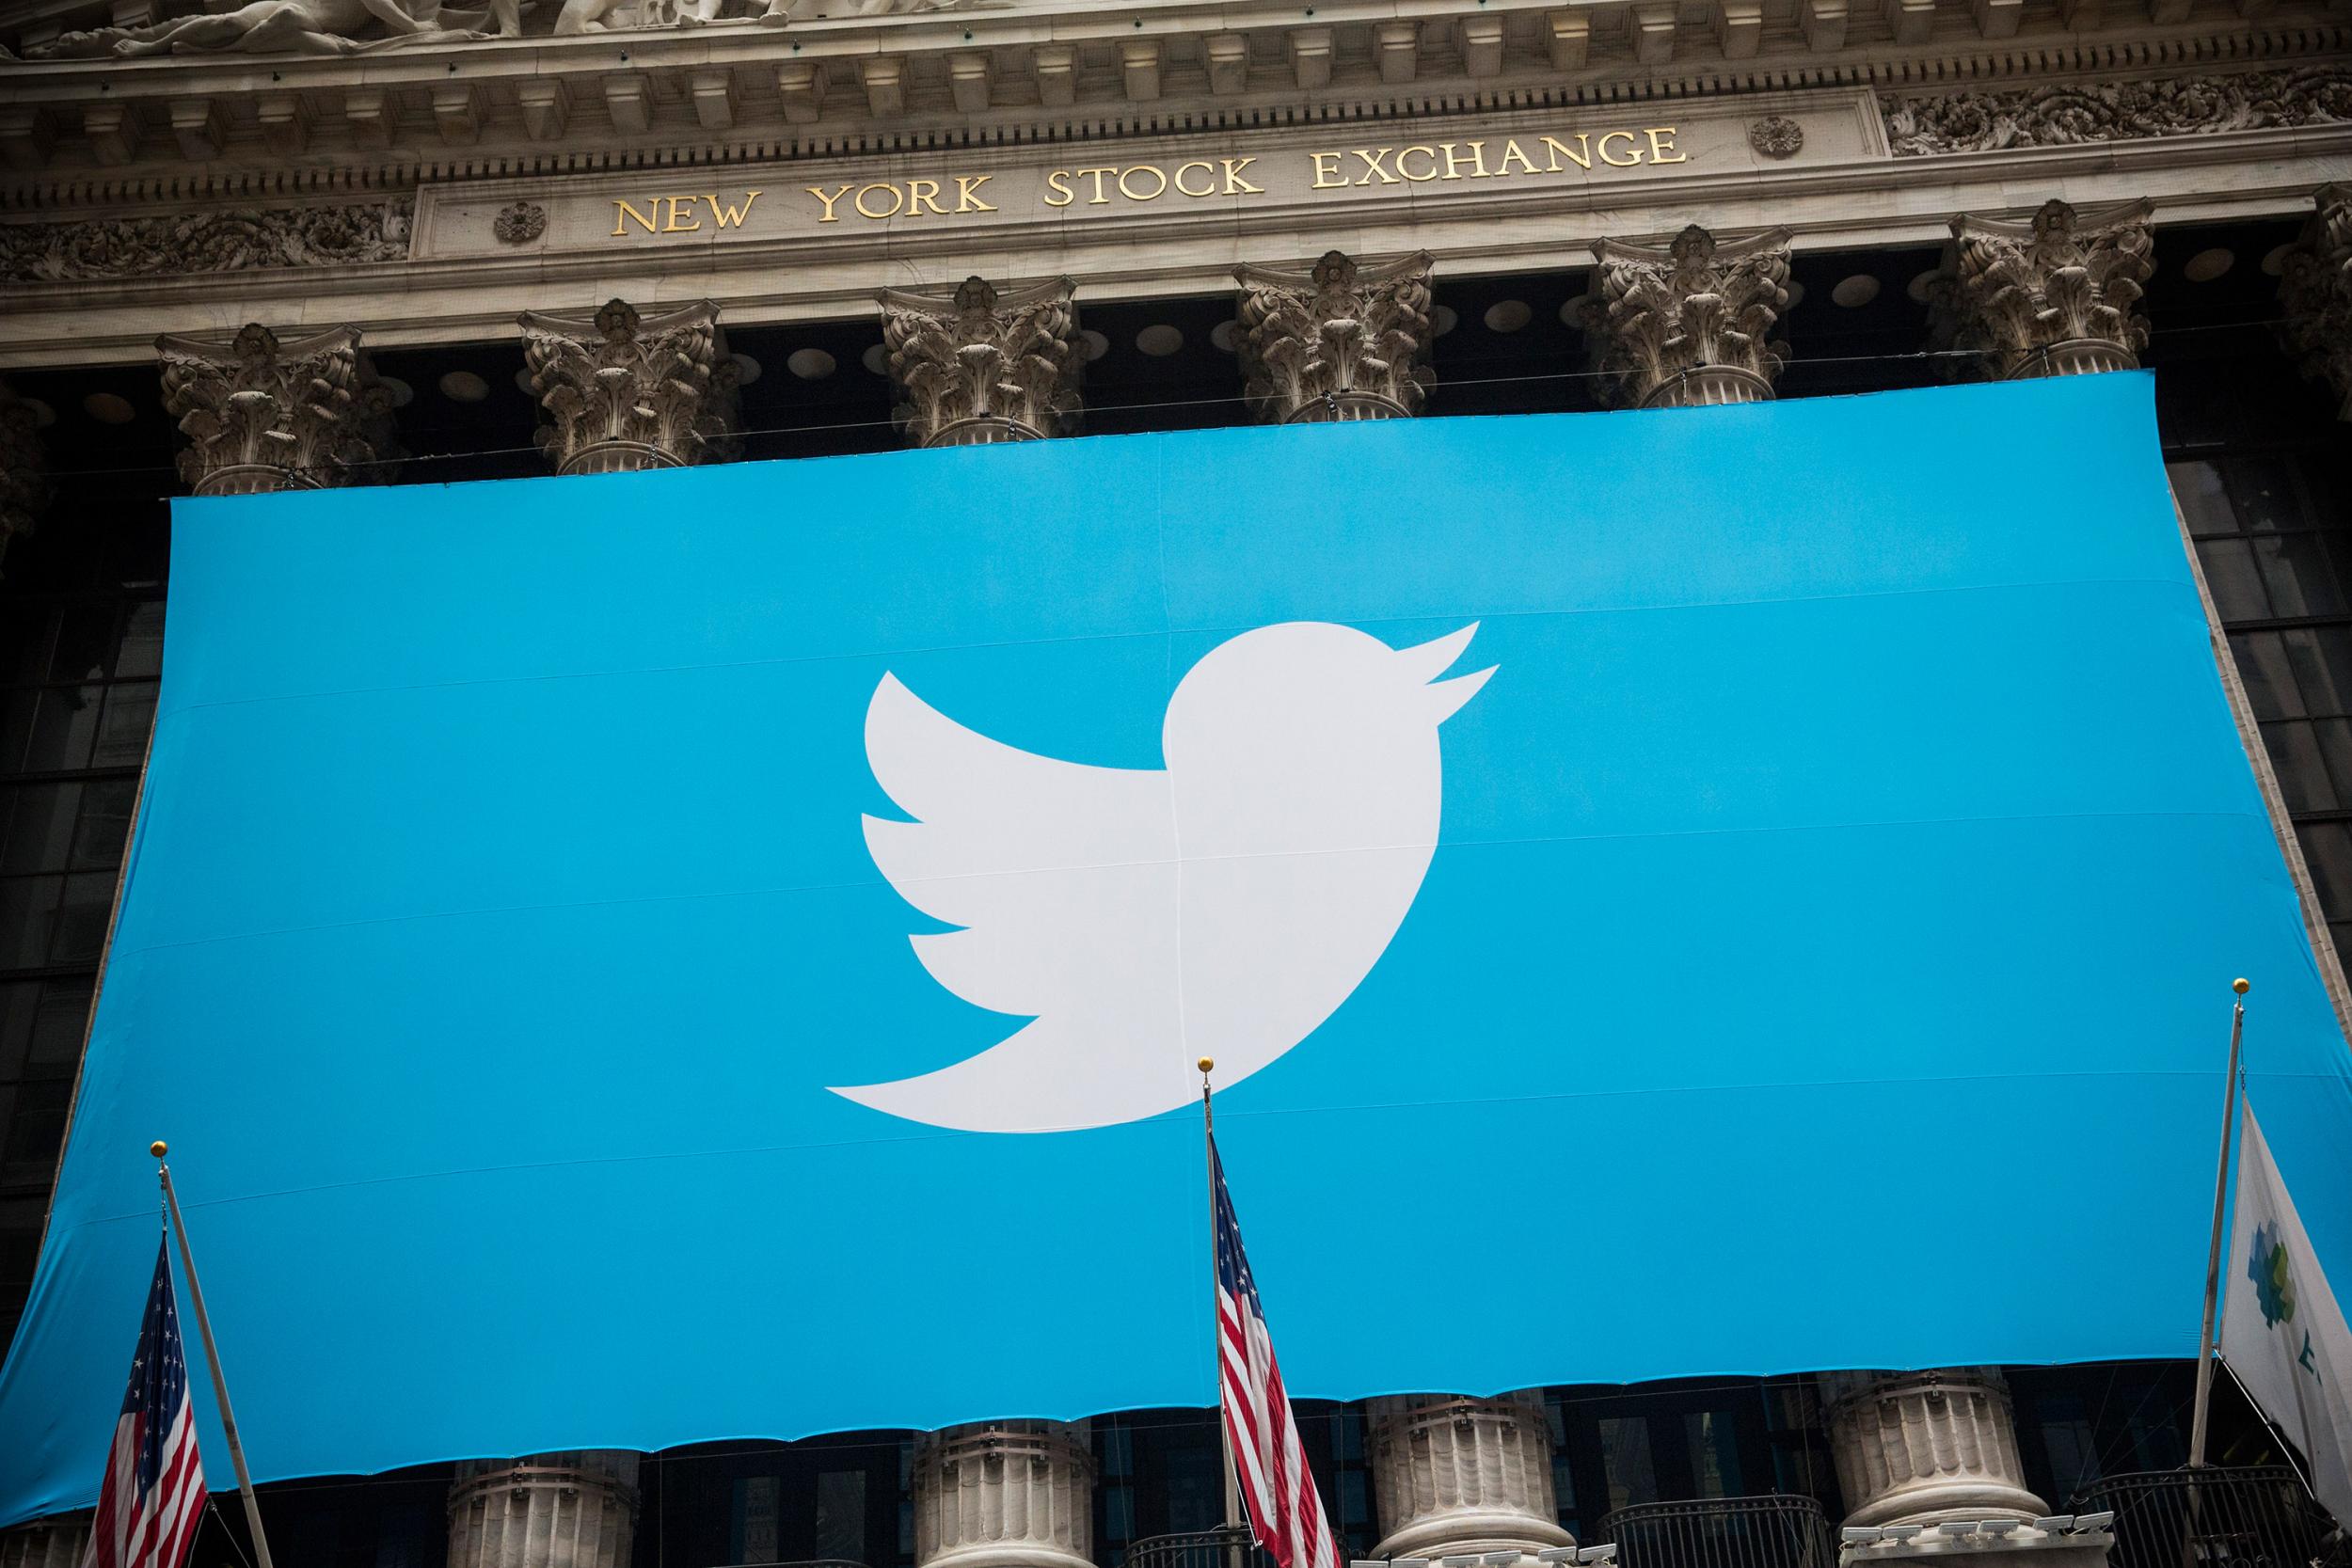 The Twitter logo displayed outside the New York Stock Exchange in November 2013